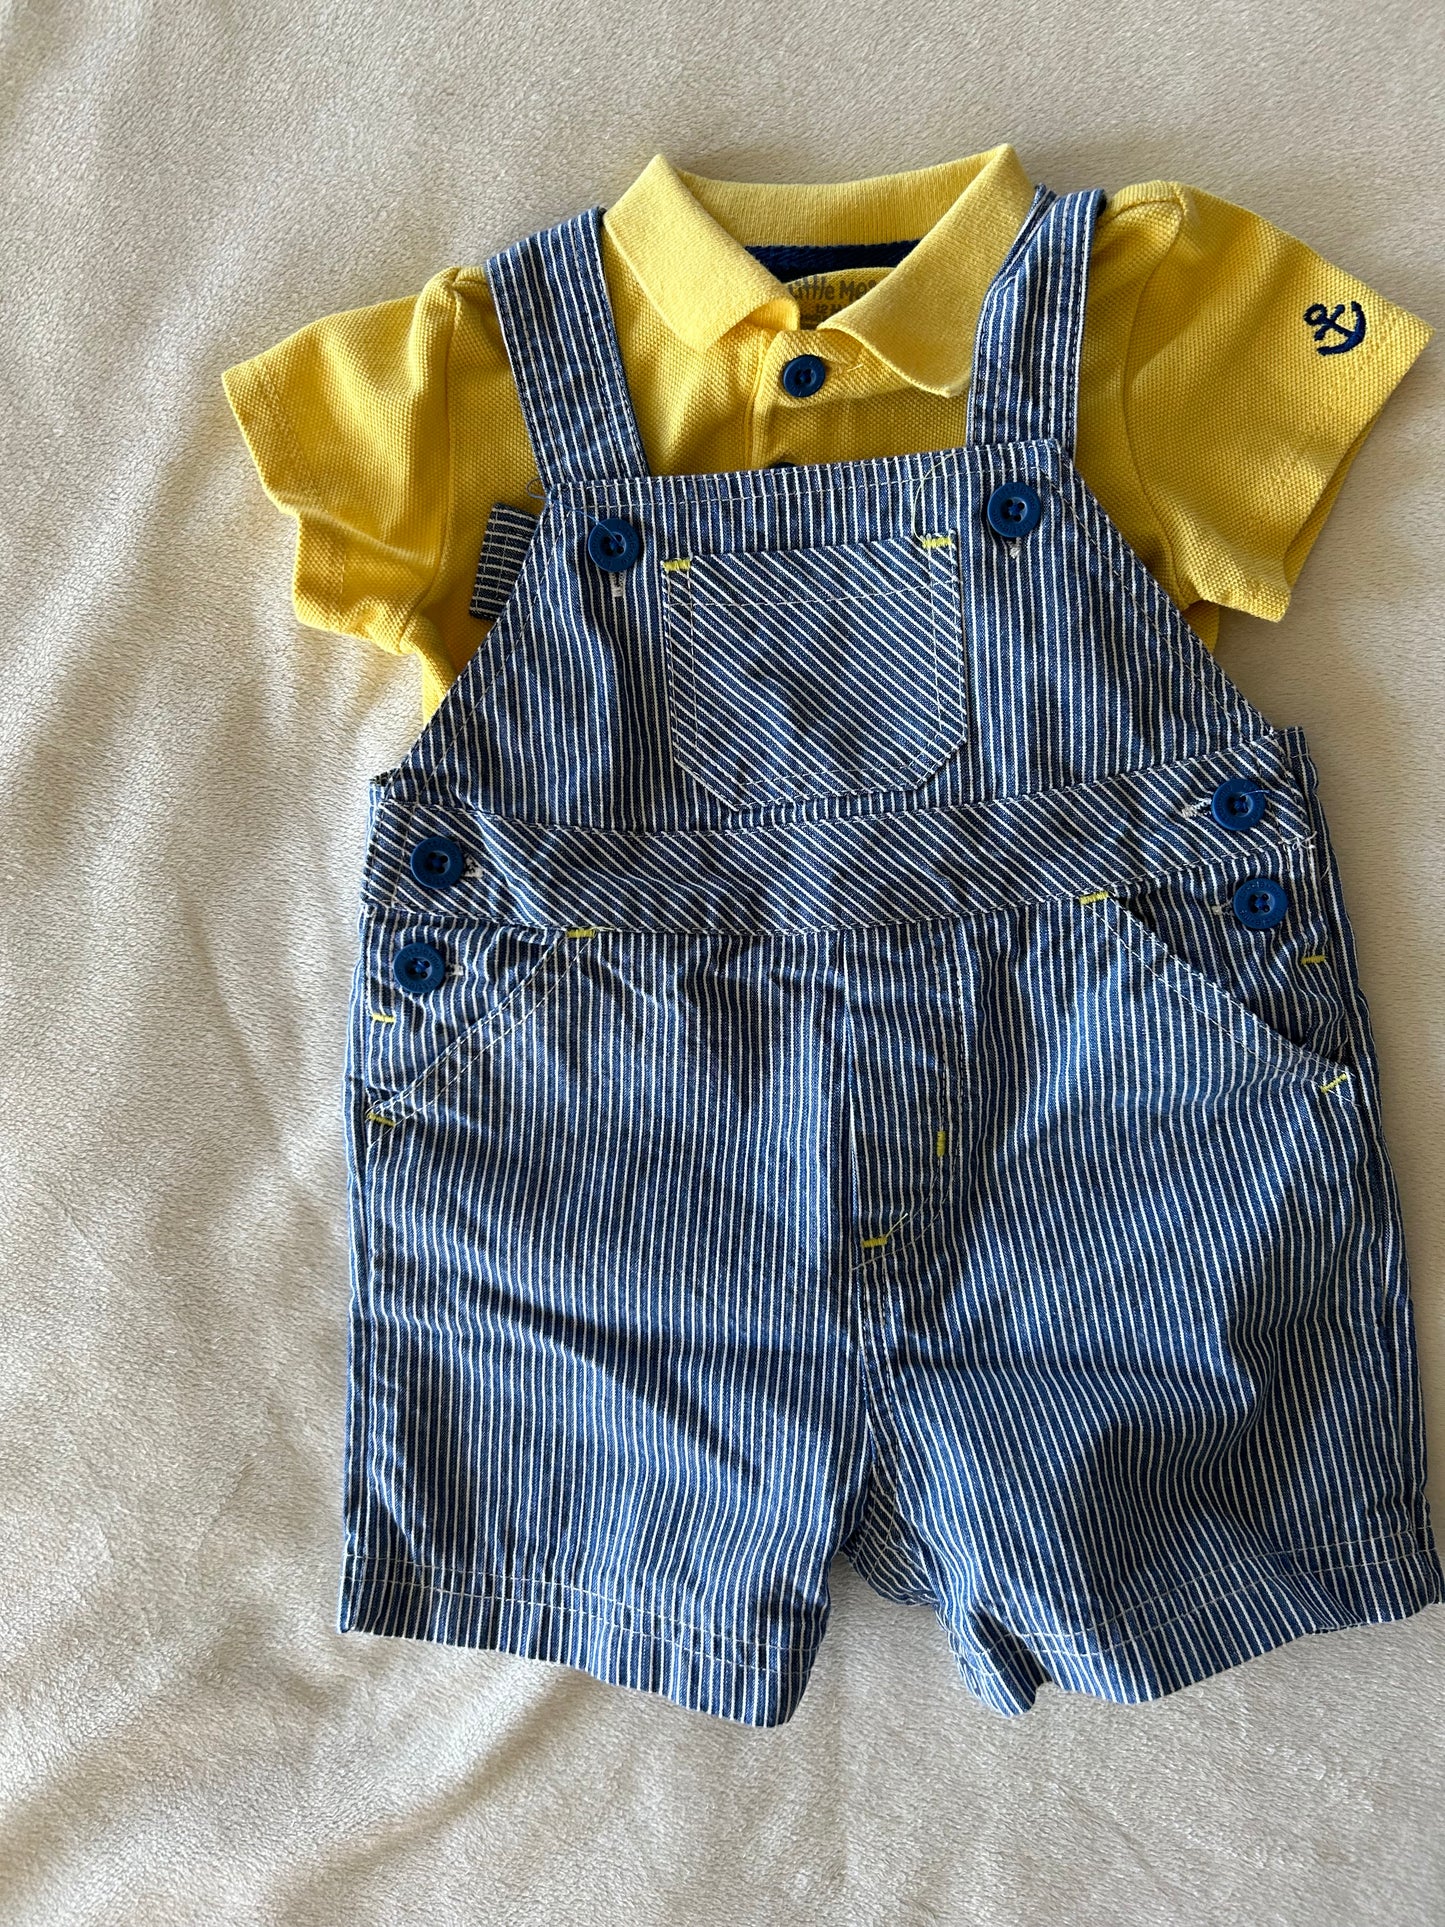 Little Me Boy 12 Month Blue Striped Overalls w/ Yellow Polo